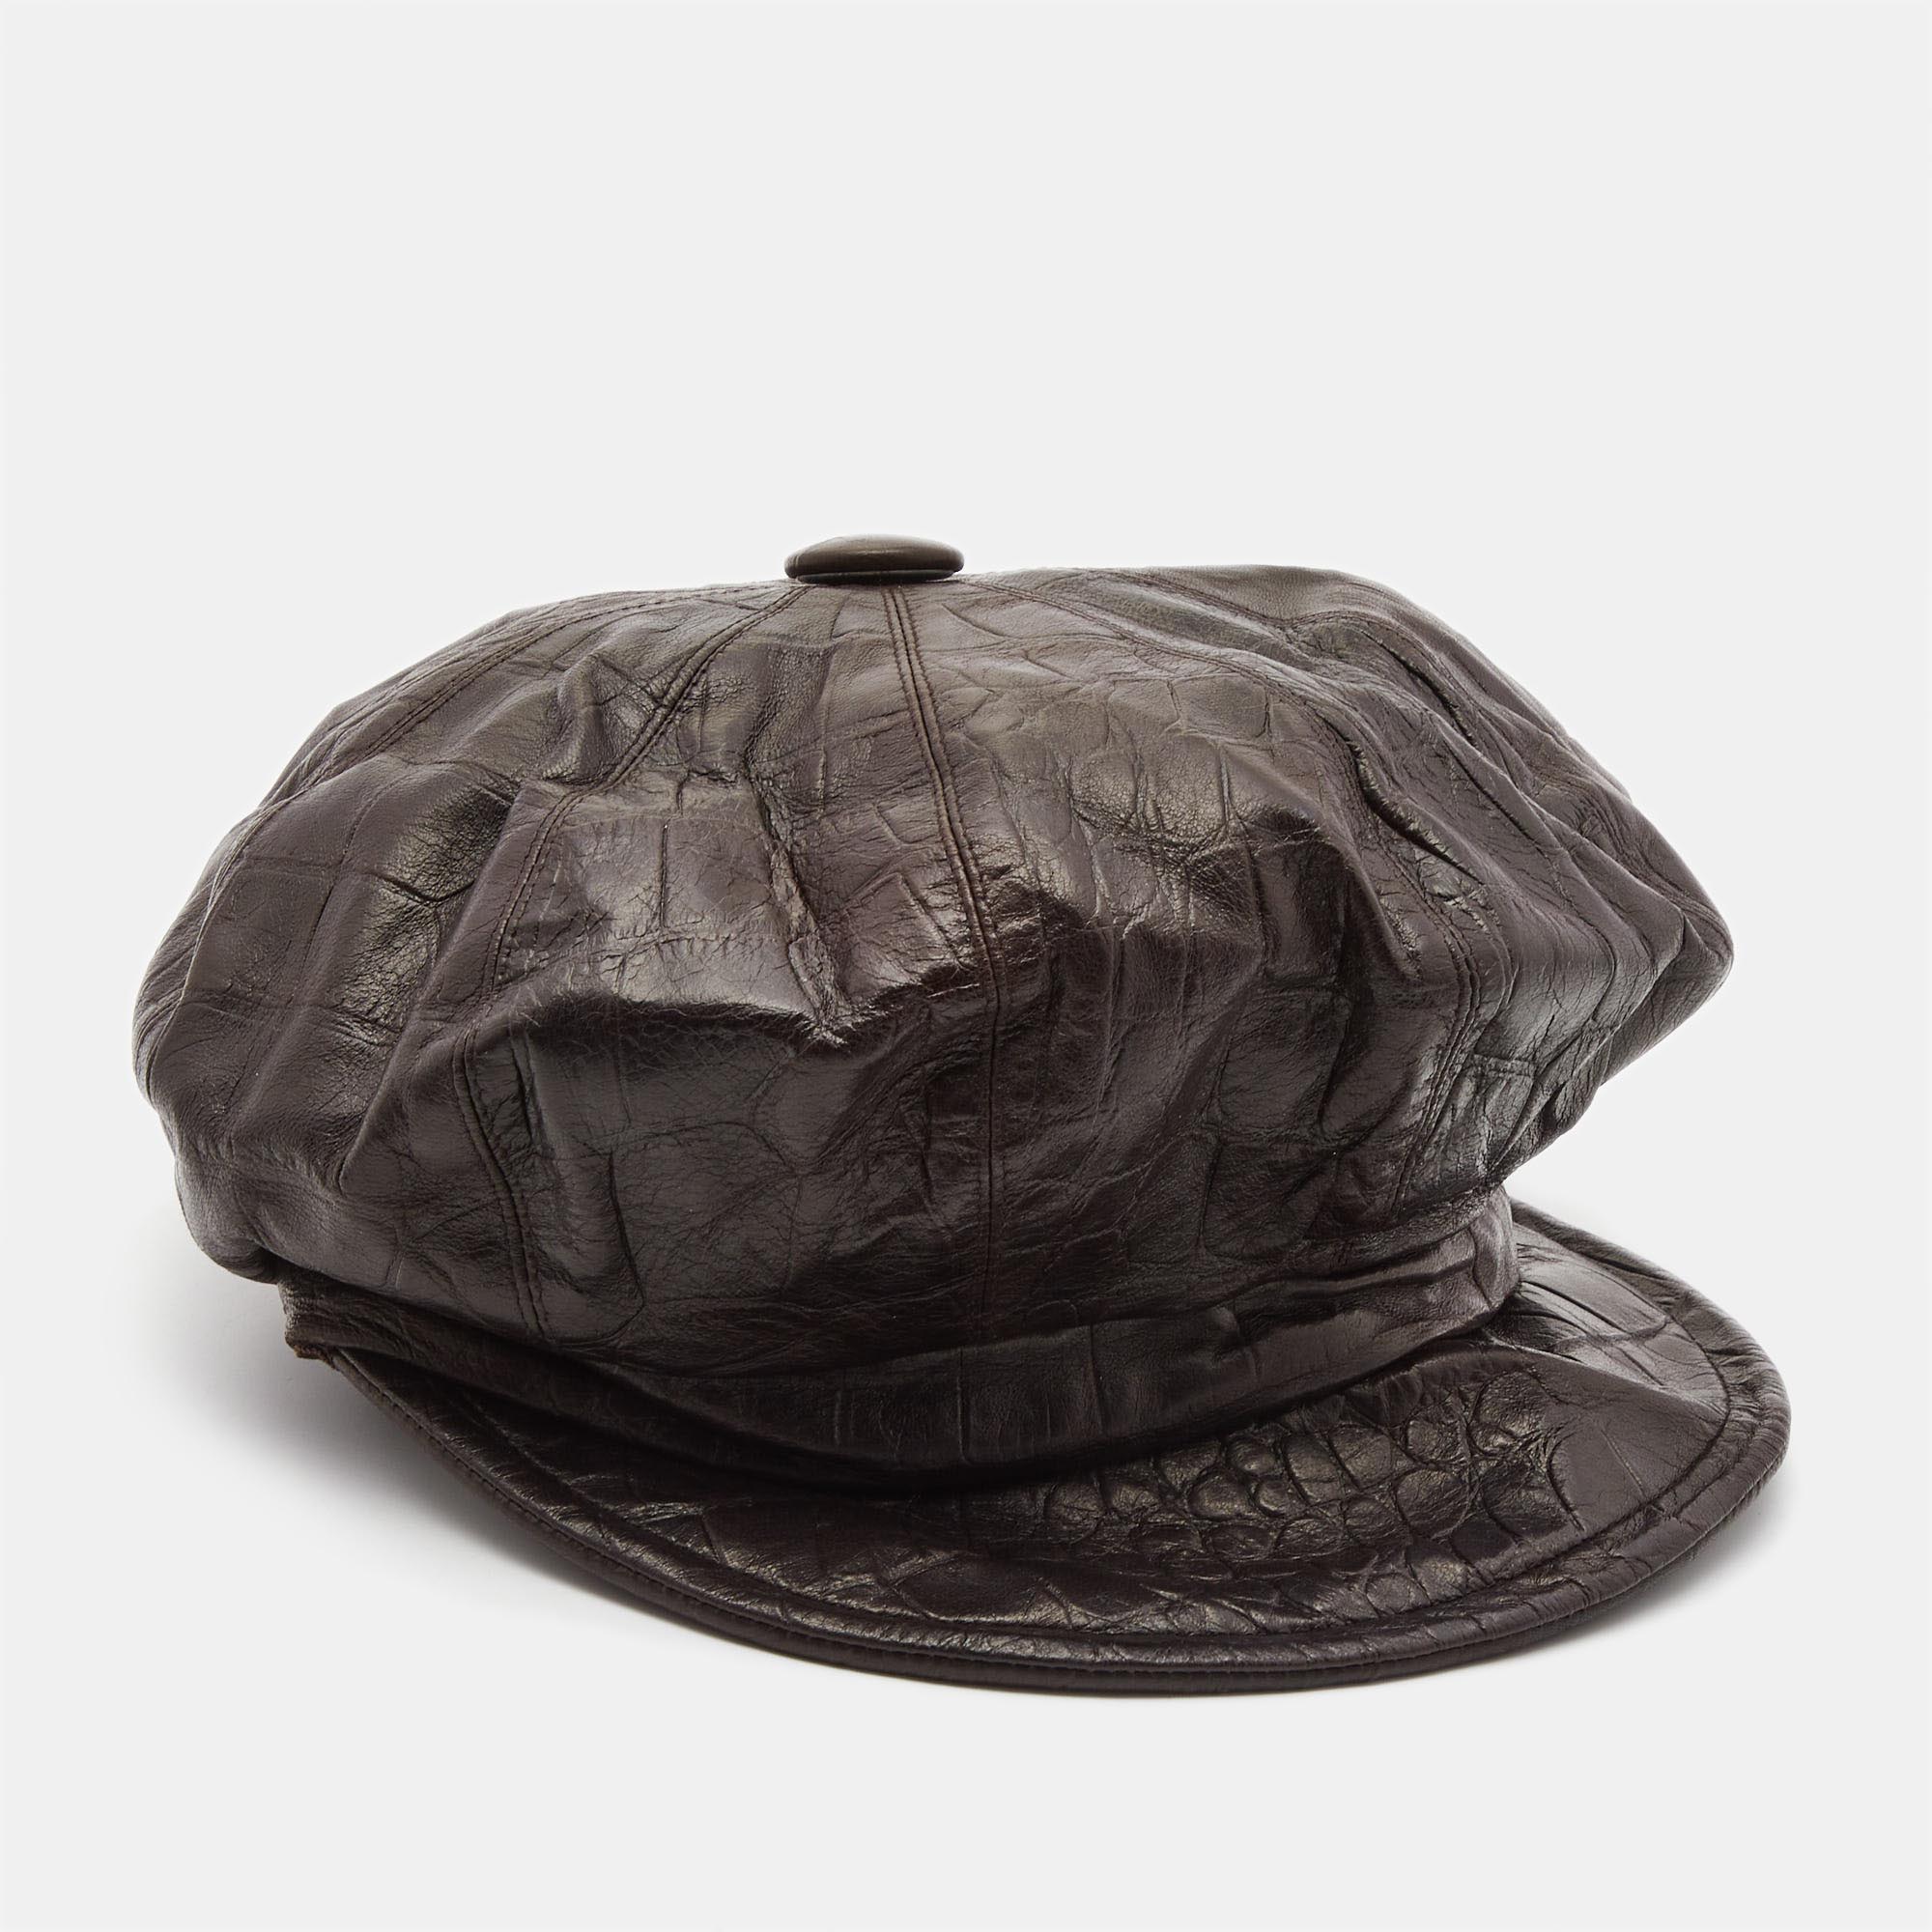 The Christian Dior Boutique newsboy hat exudes timeless elegance. Crafted with precision its rich brown hue and exquisite crocodile embossed leather showcase luxury. The newsboy silhouette adds a touch of classic charm making it a sophisticated accessory for the fashion forward individual.